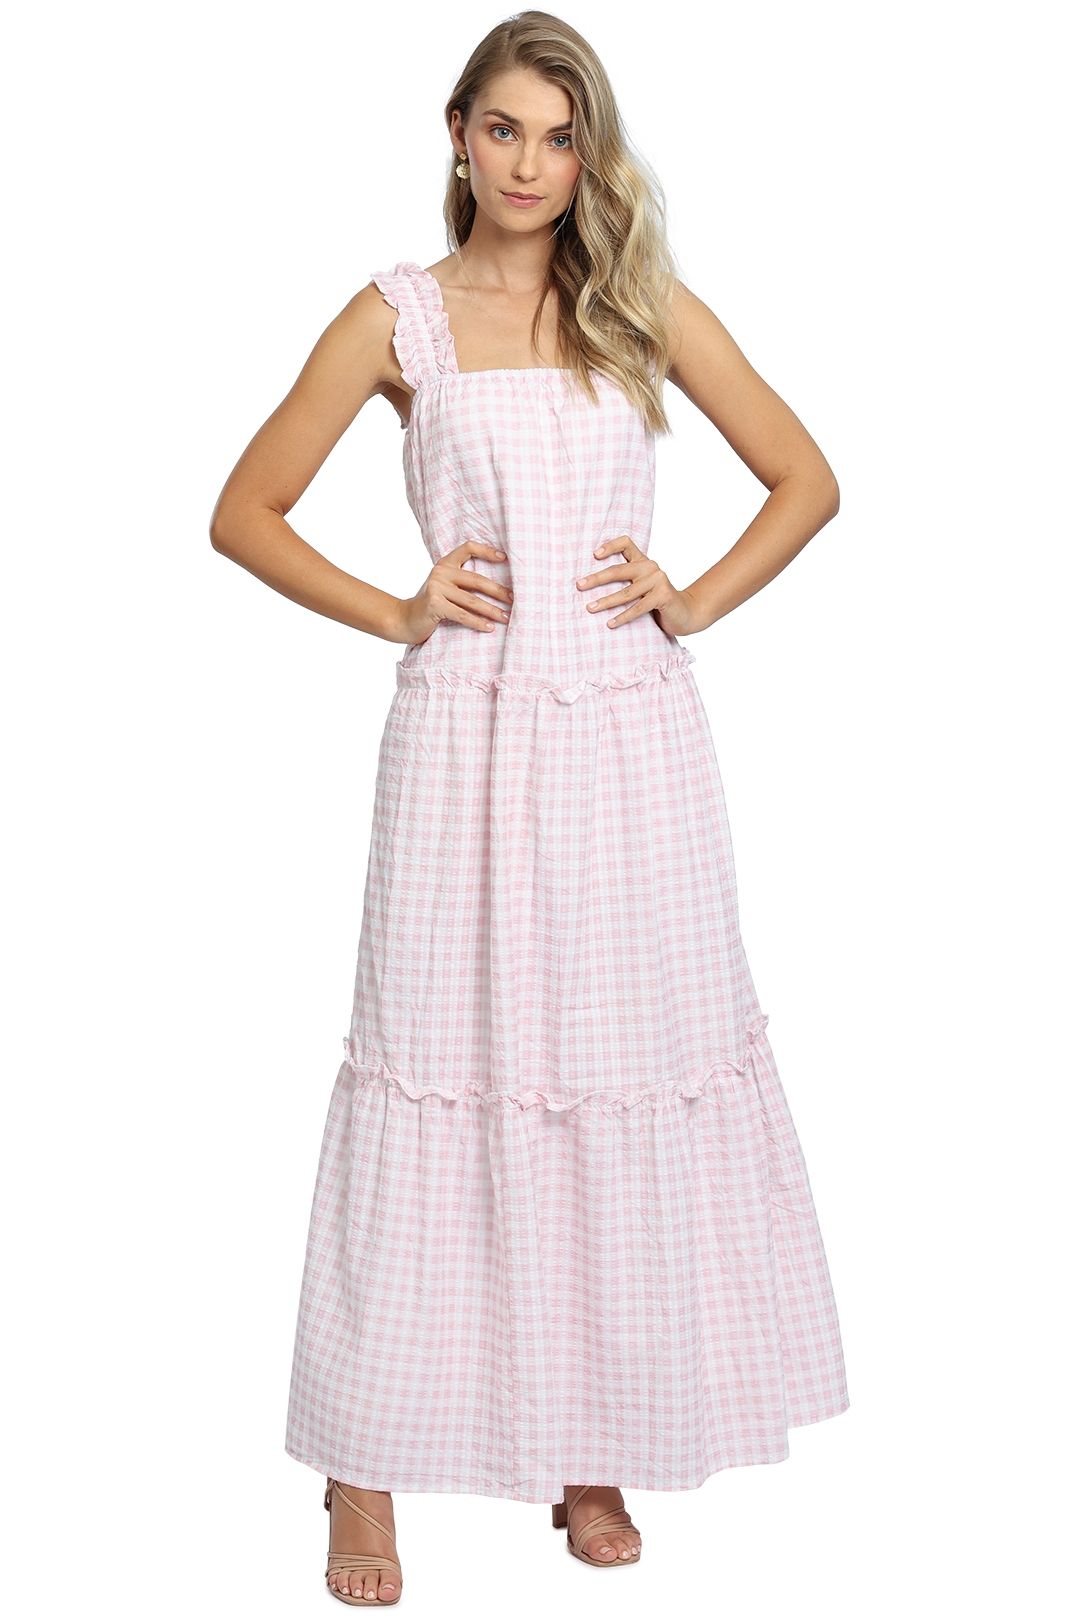 Charlie Holiday Lottie Maxi Dress Pink Gingham Pink Check